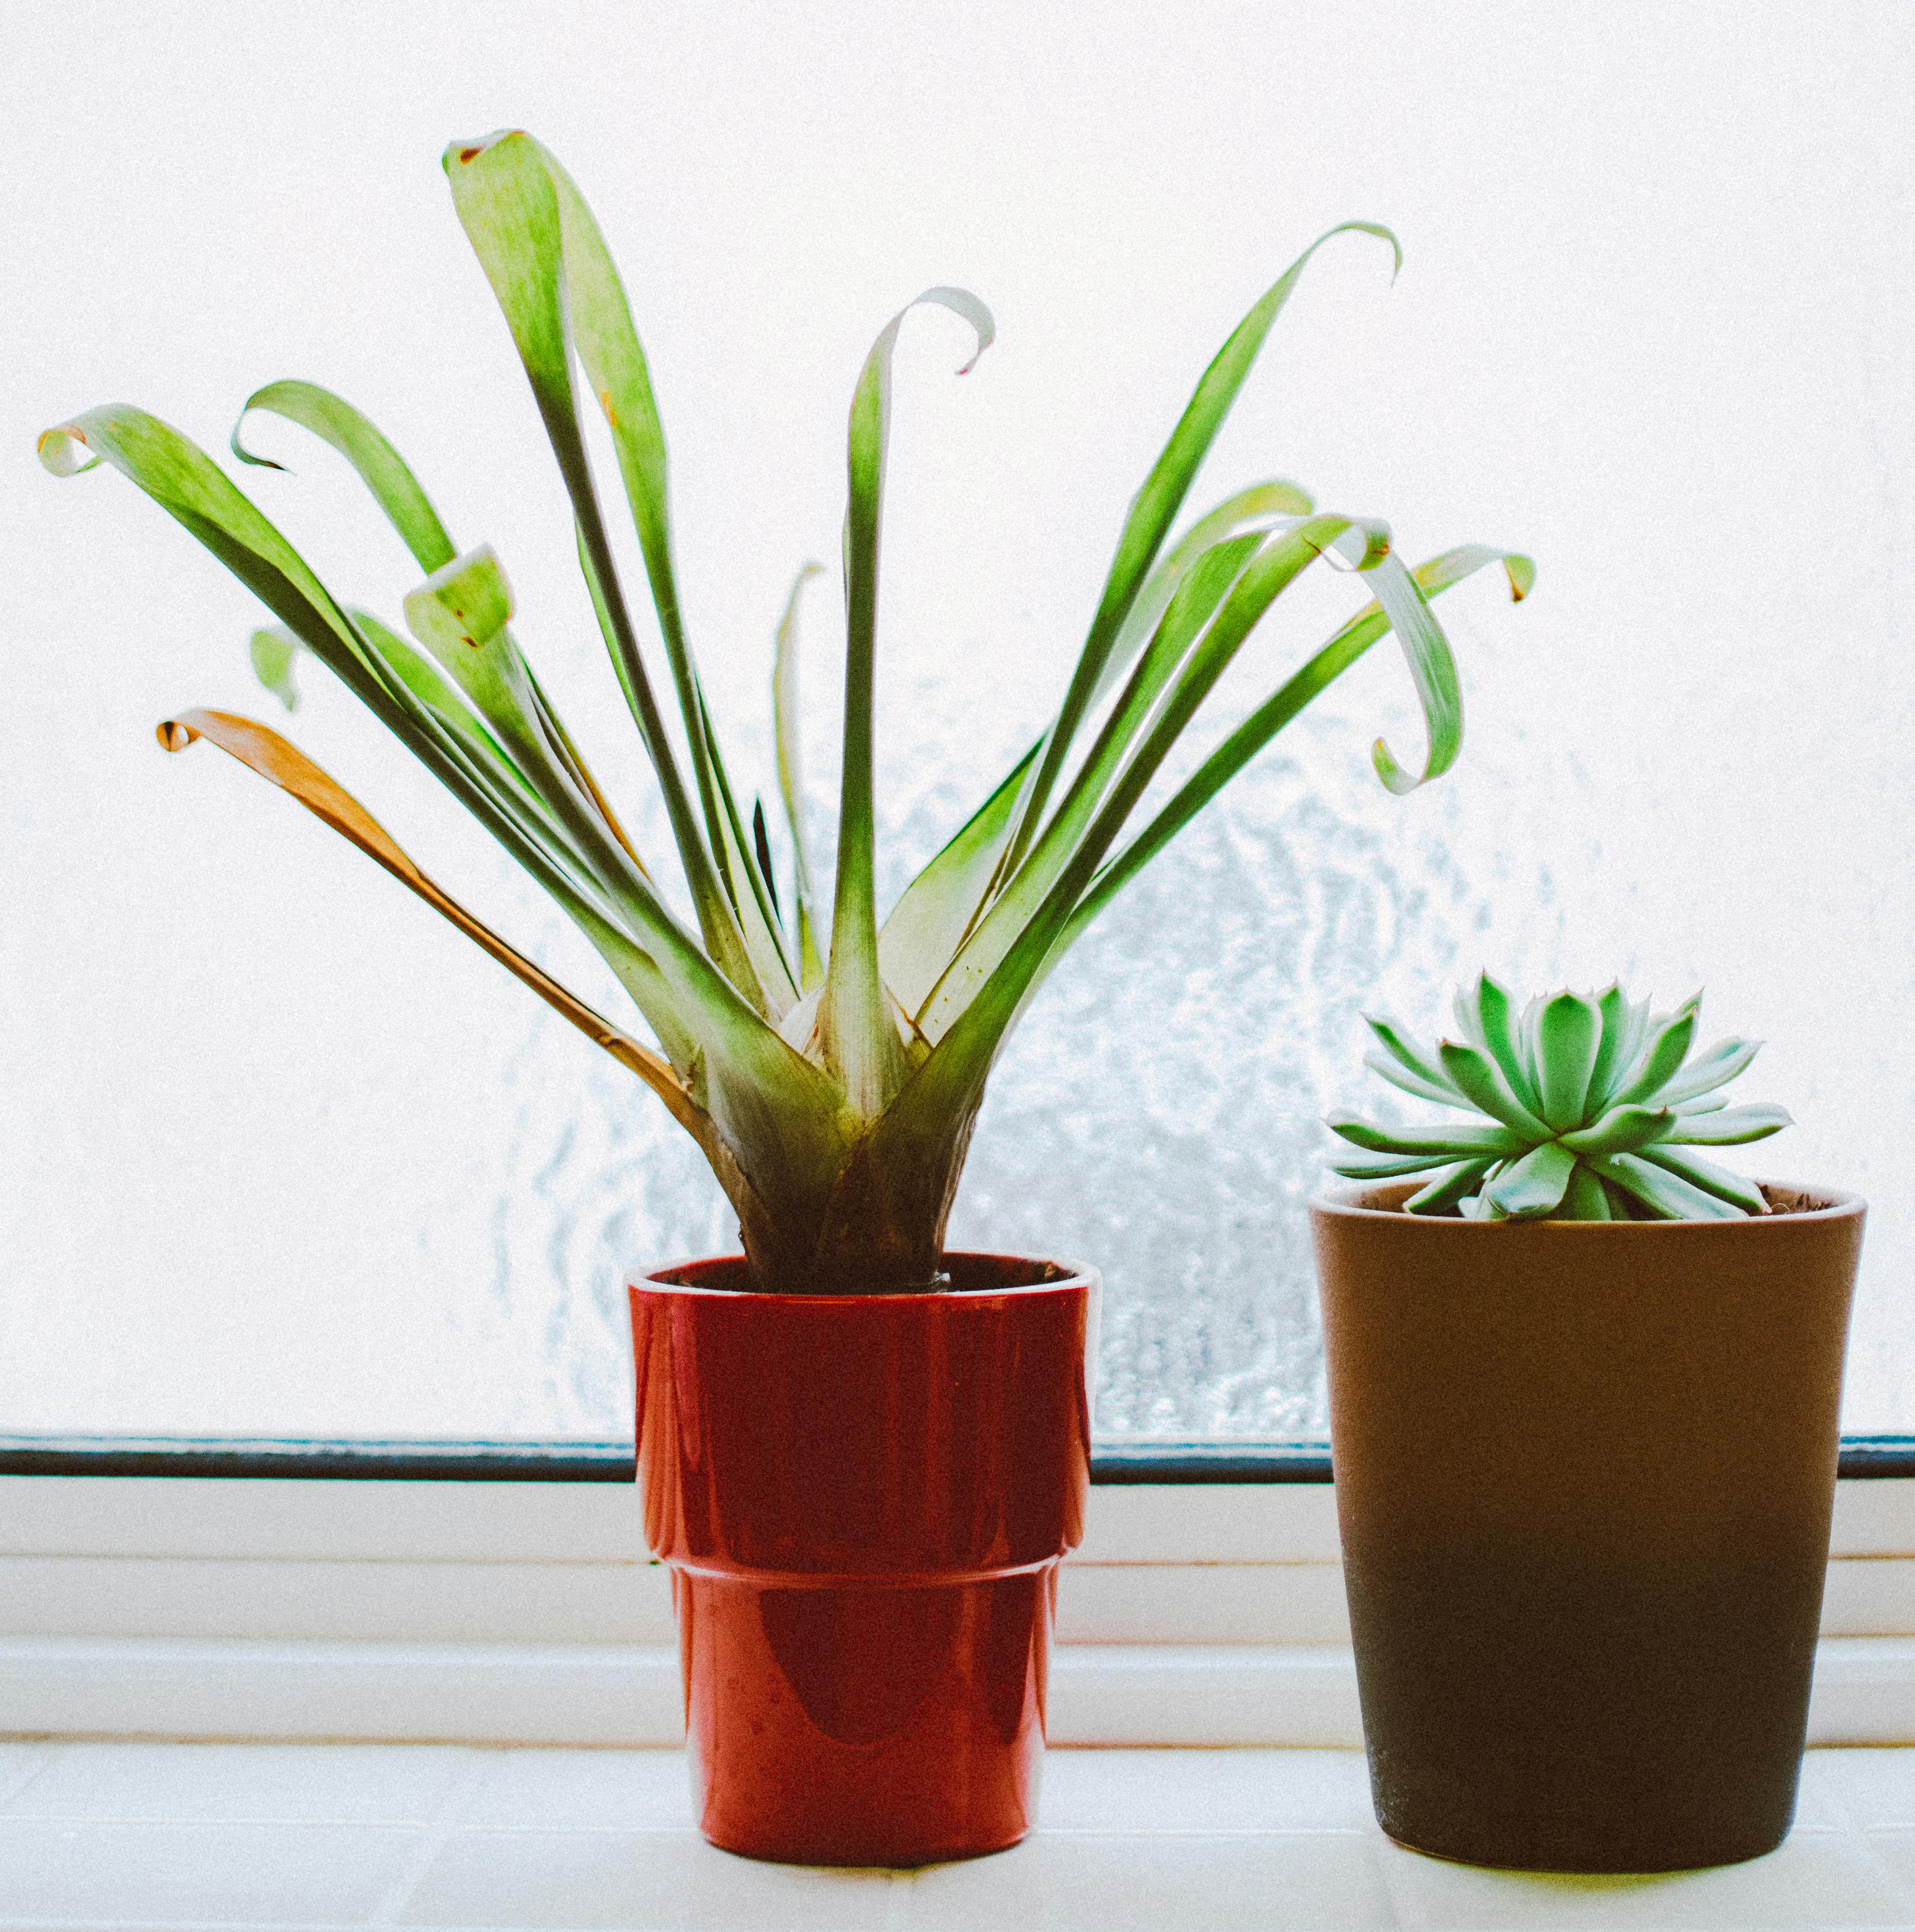 6 Easy-Care Potted Plants To Brighten Your Home This Season